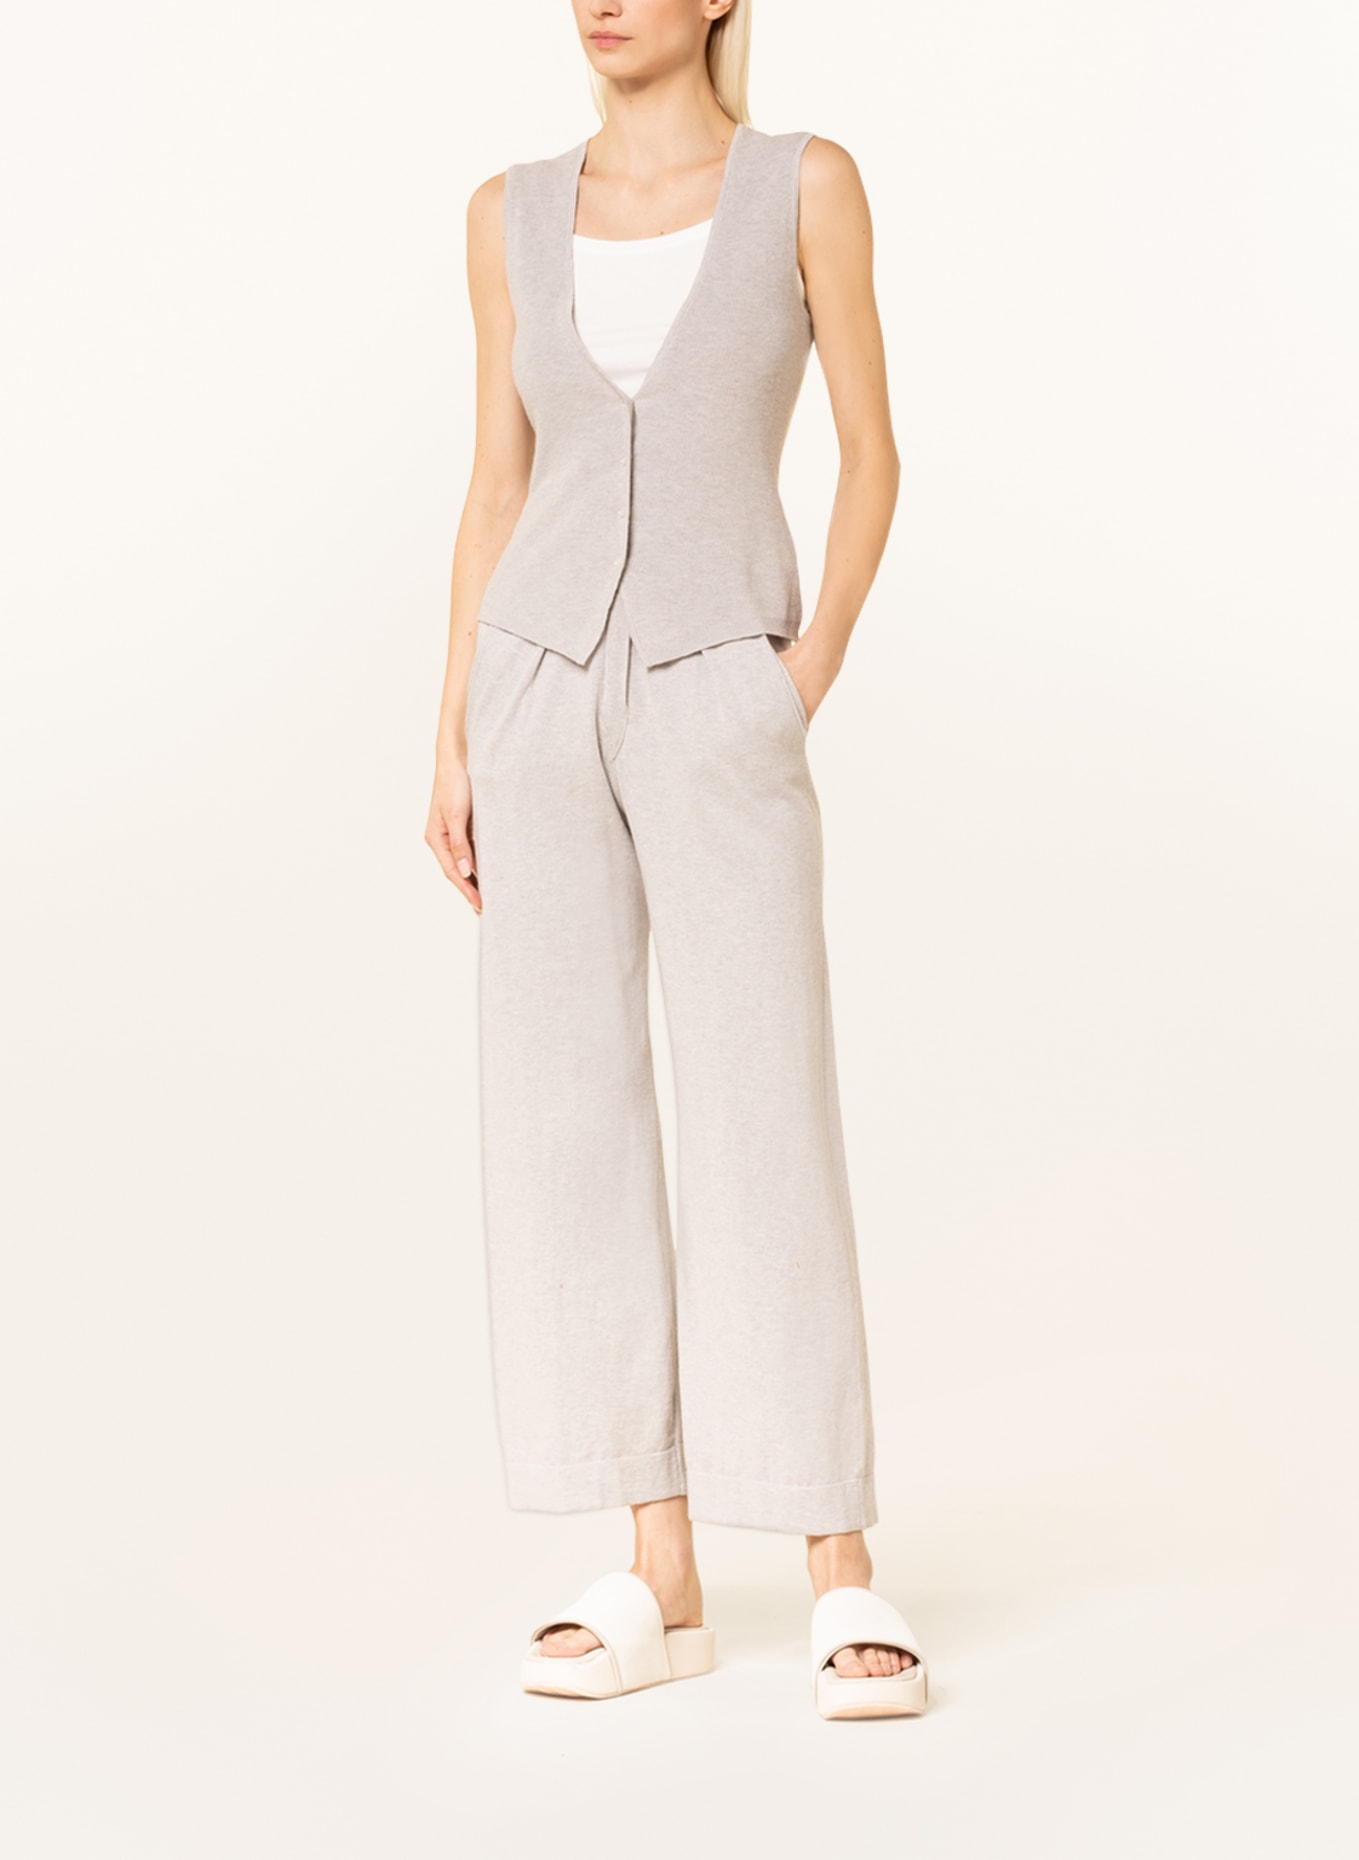 GITTA BANKO Knit trousers in jogger style with cashmere, Color: LIGHT GRAY (Image 2)